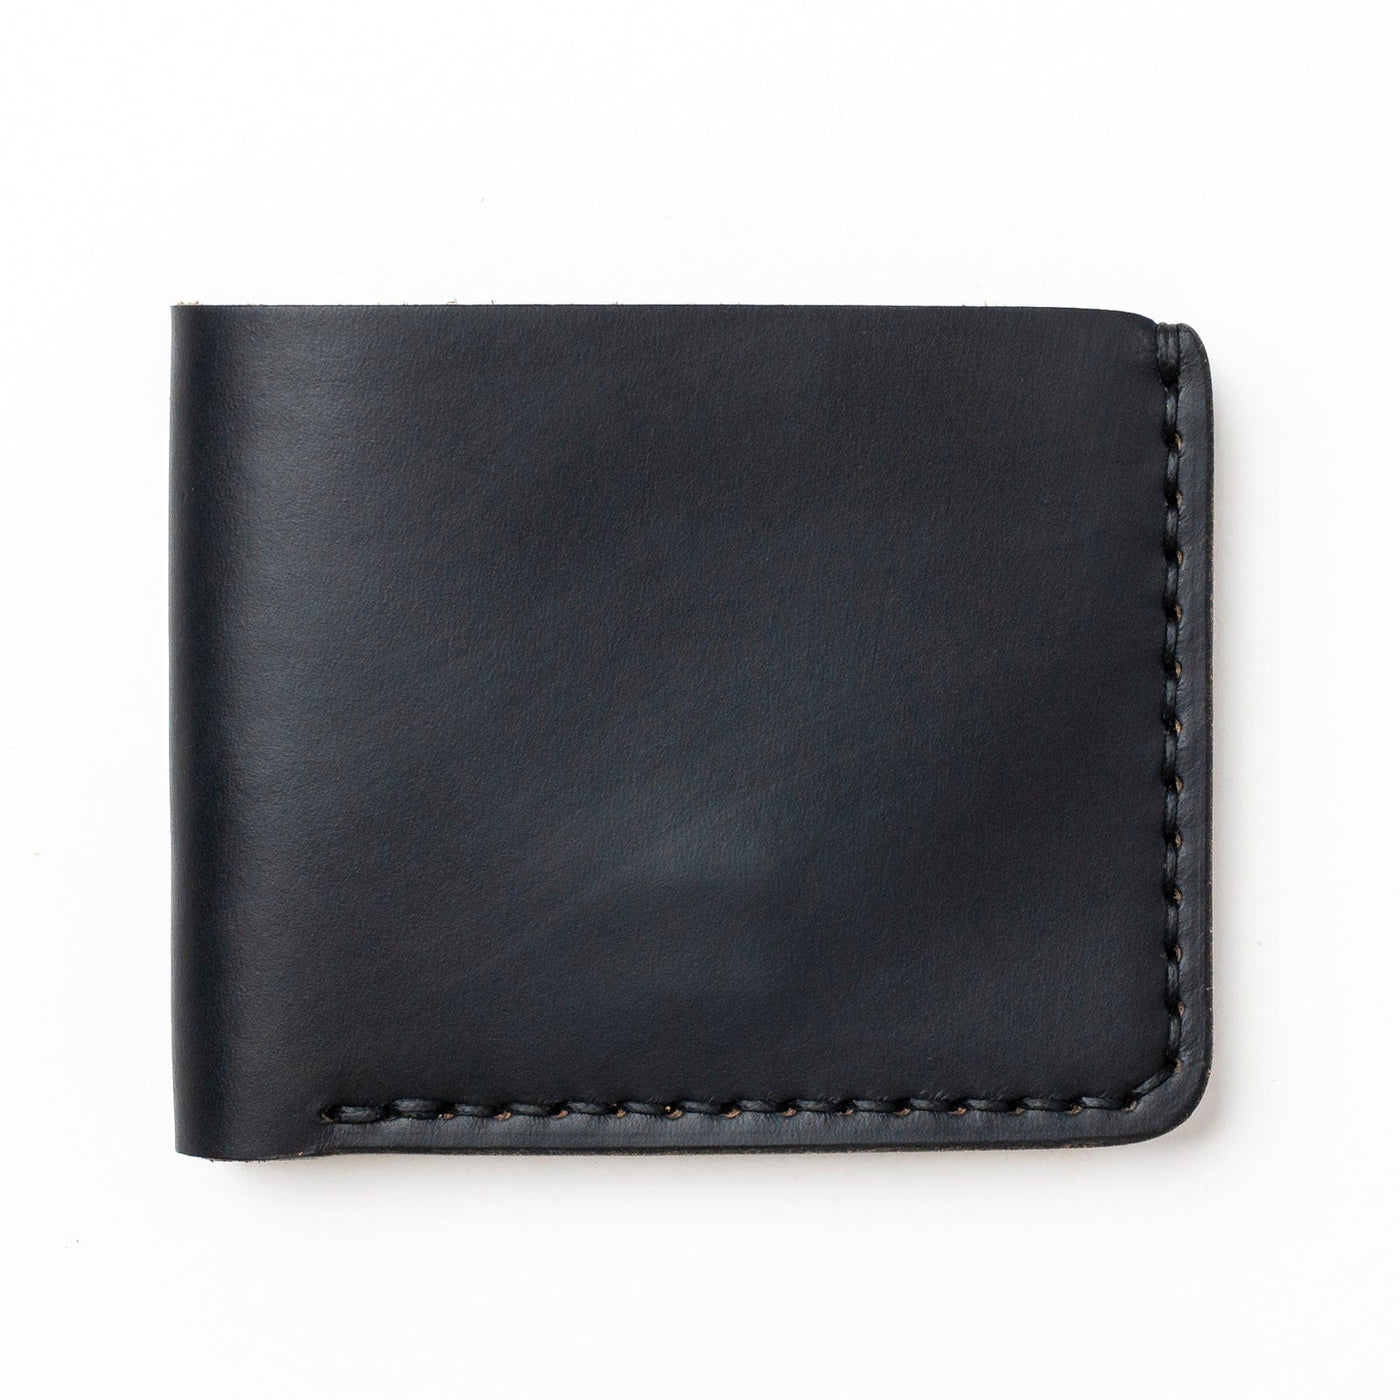 Black Leather Billfold: Where Timeless Design Meets Functionality - Popov  Leather®